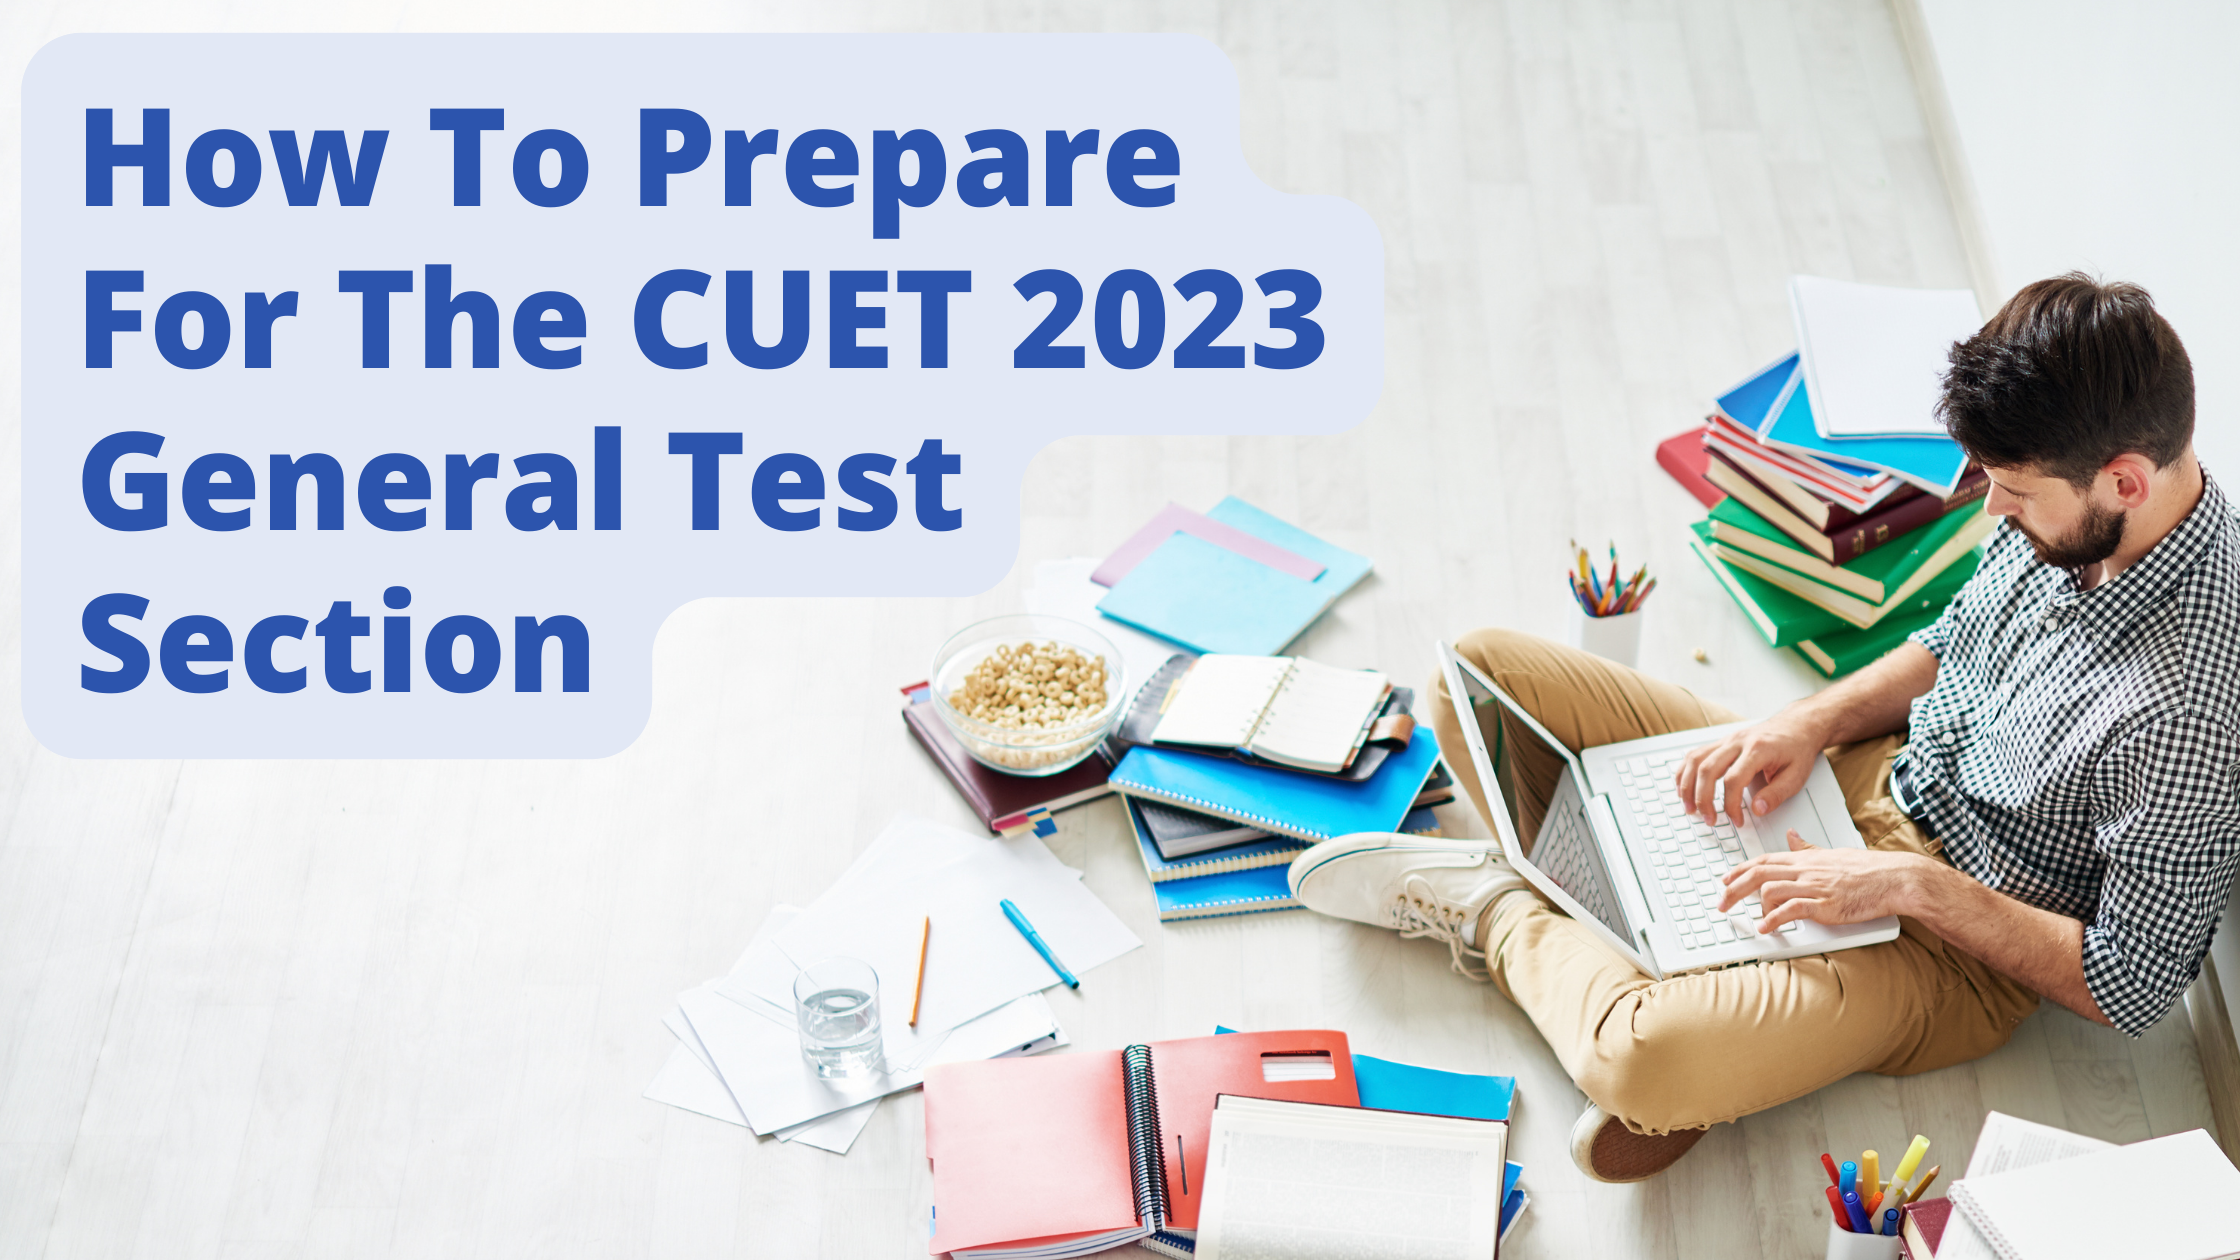 How to Prepare for CUET 2023